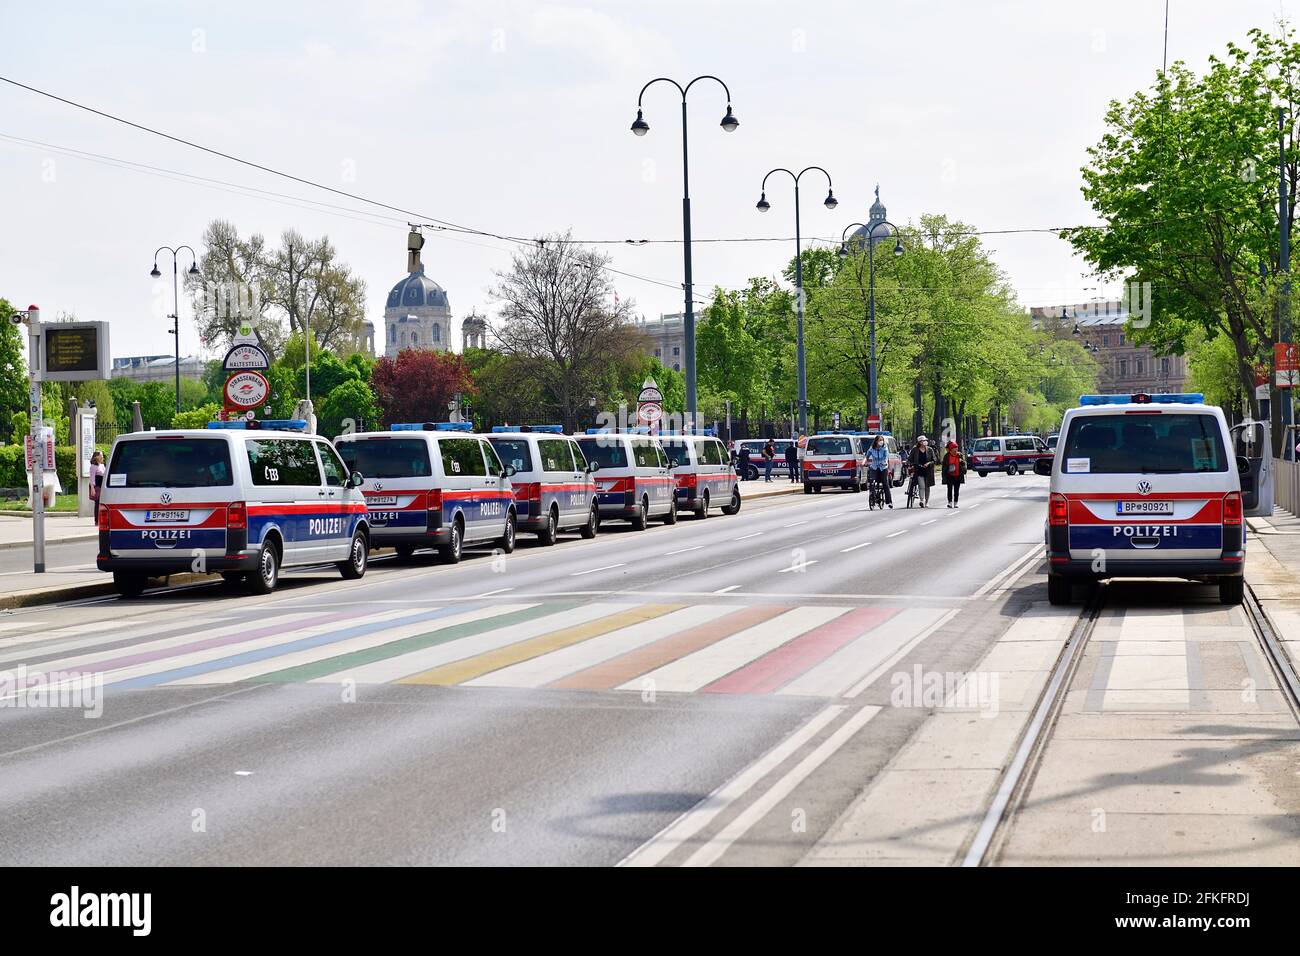 Vienna, Austria. May 1st, 2021. Big demonstration day on May 1st in Vienna. The police are also expecting several unregistered demonstrations and will cordon off several streets in downtown Vienna for safety. Mayday Vienna demonstration. Stock Photo